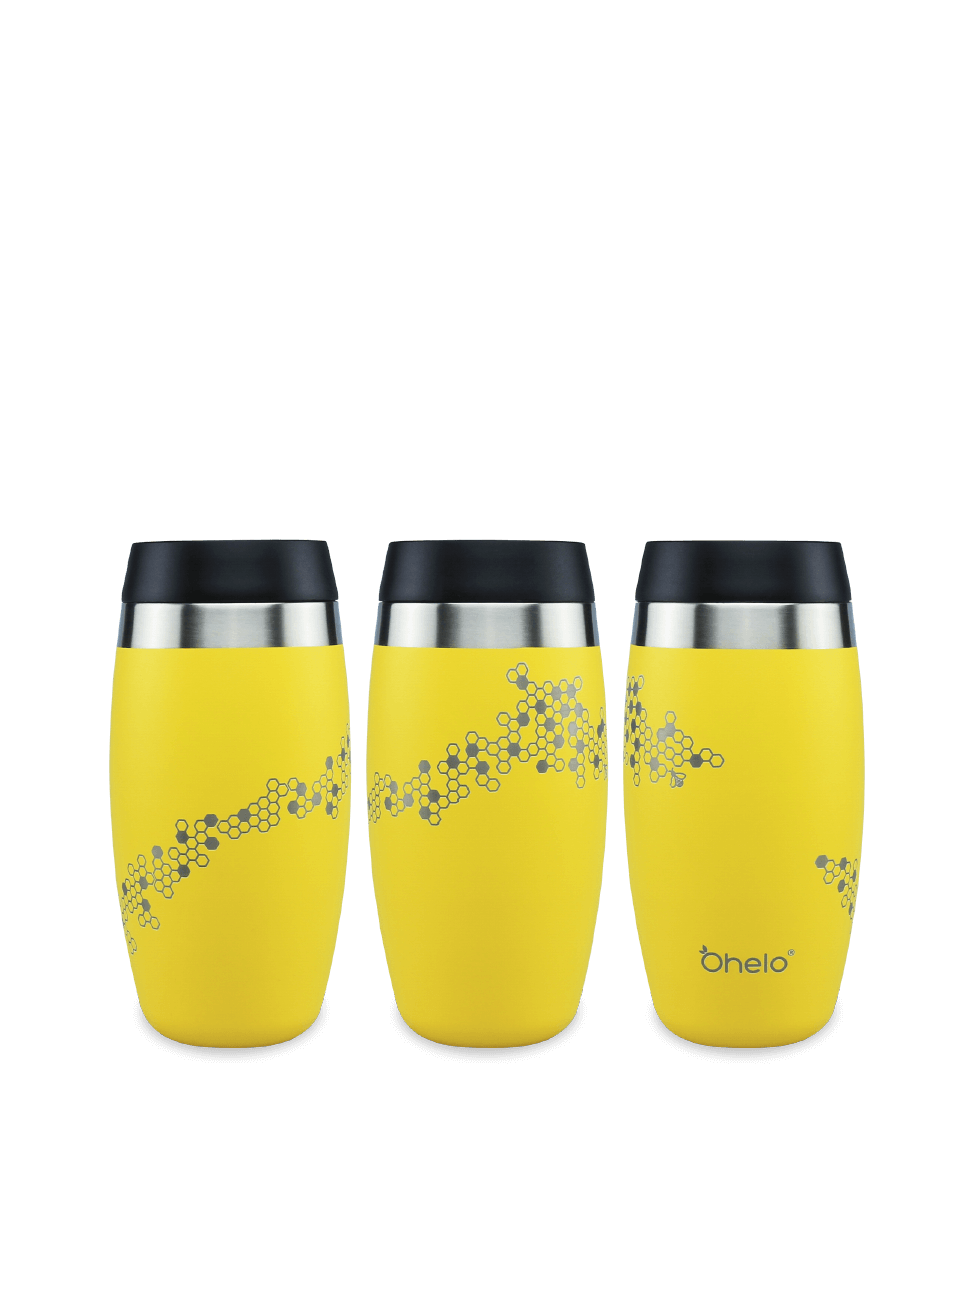 Ohelo dishwasher safe travel mug in yellow with bee design - image showing design from 3 sides